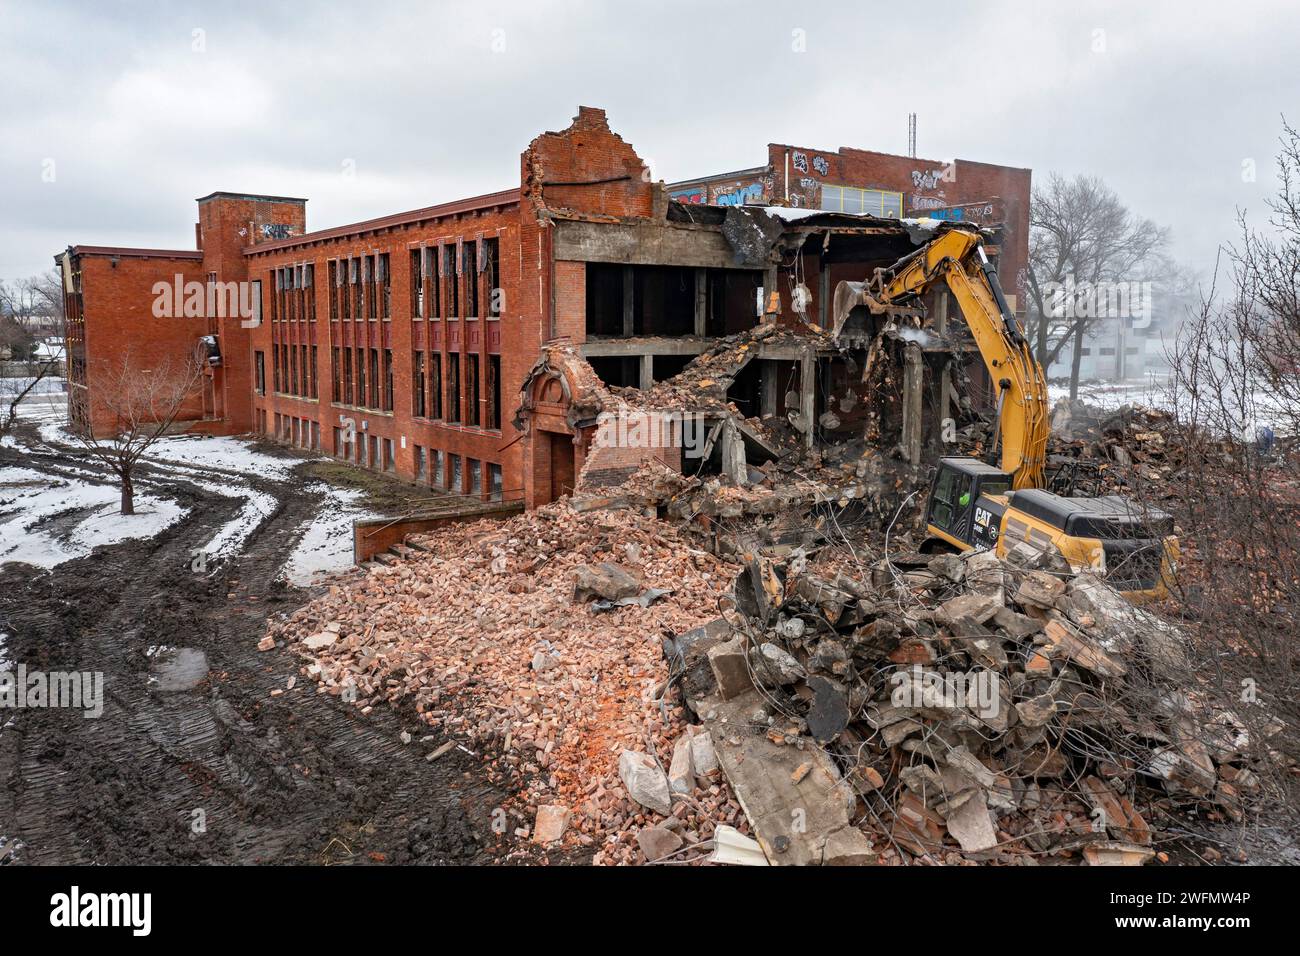 Detroit, United States. 31st Jan, 2024. Detroit, Michigan - The former Woodrow Wilson Intermediate school (later the Phoenix Academy charter school) is demolished. It is one of 63 currently vacant school buildings in the city. Since 2000, nearly 200 public schools in Detroit have closed due to declining enrollment. Credit: Jim West/Alamy Live News Stock Photo